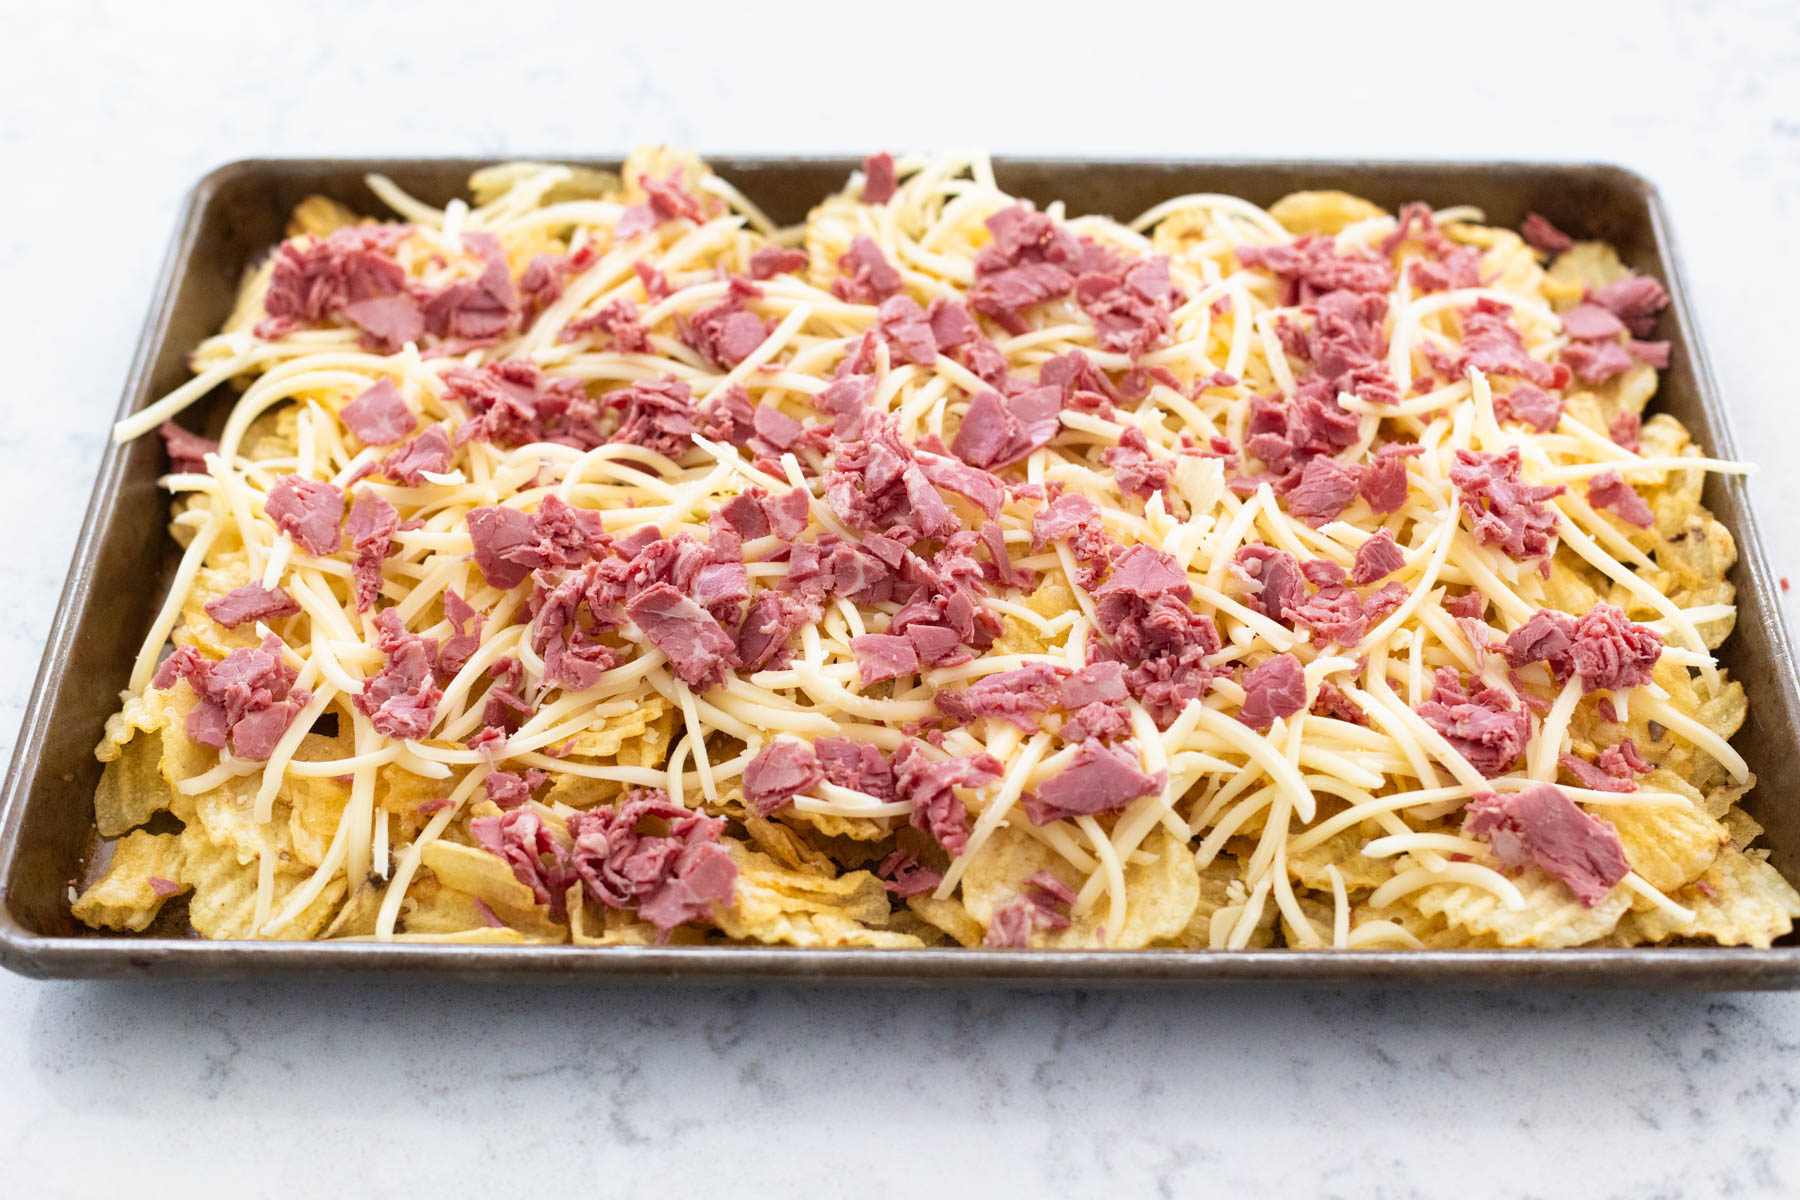 The potato chips have been covered in swiss cheese and corned beef.